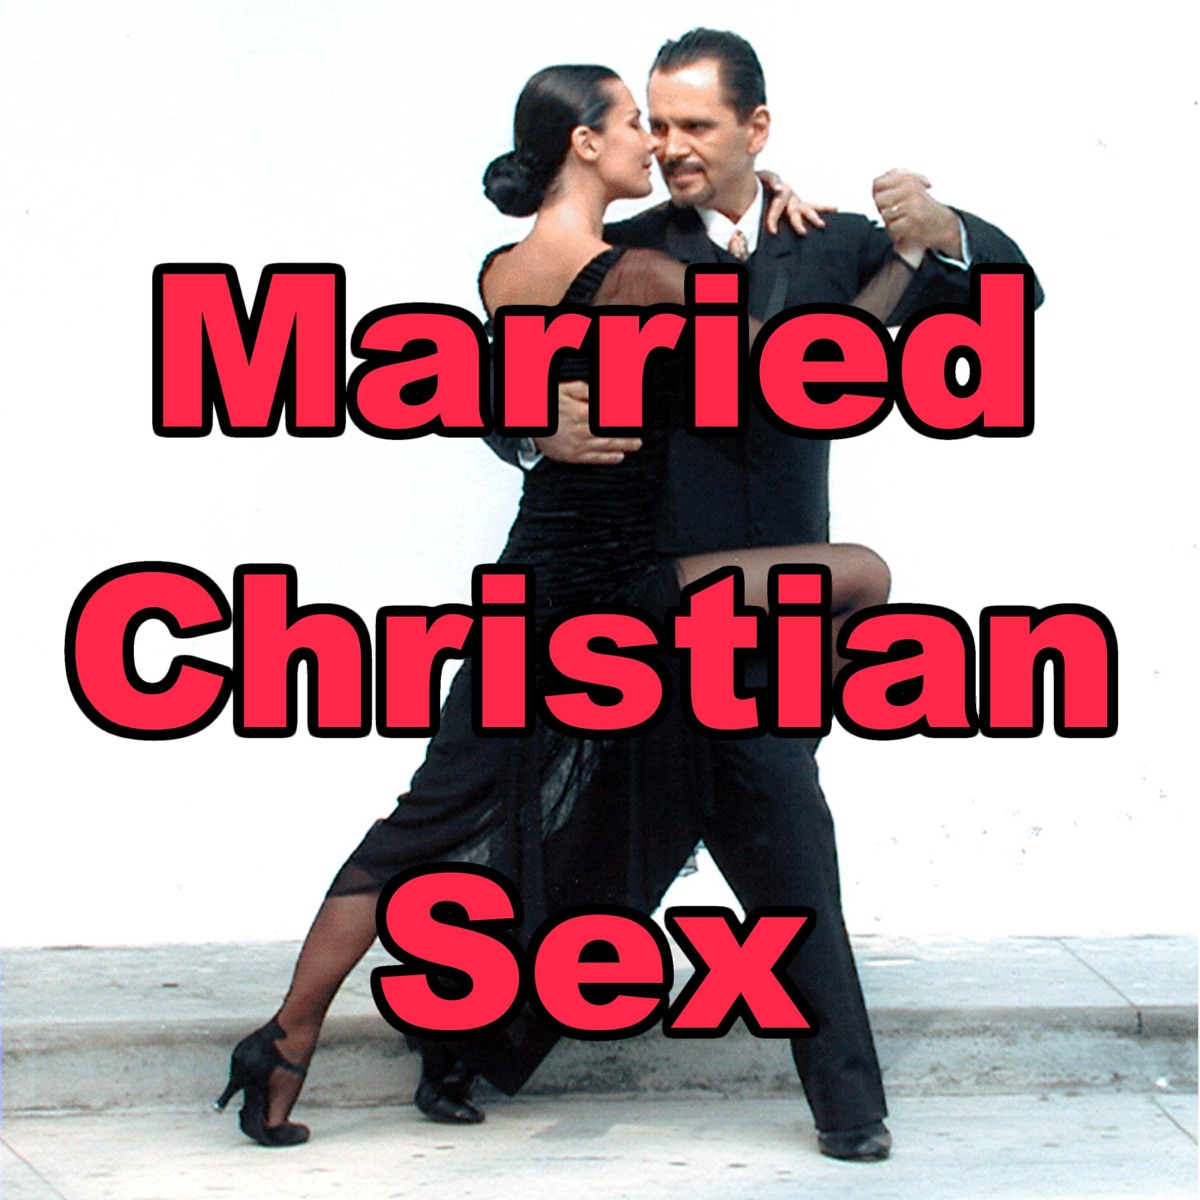 Married Christian Sex – Podcast